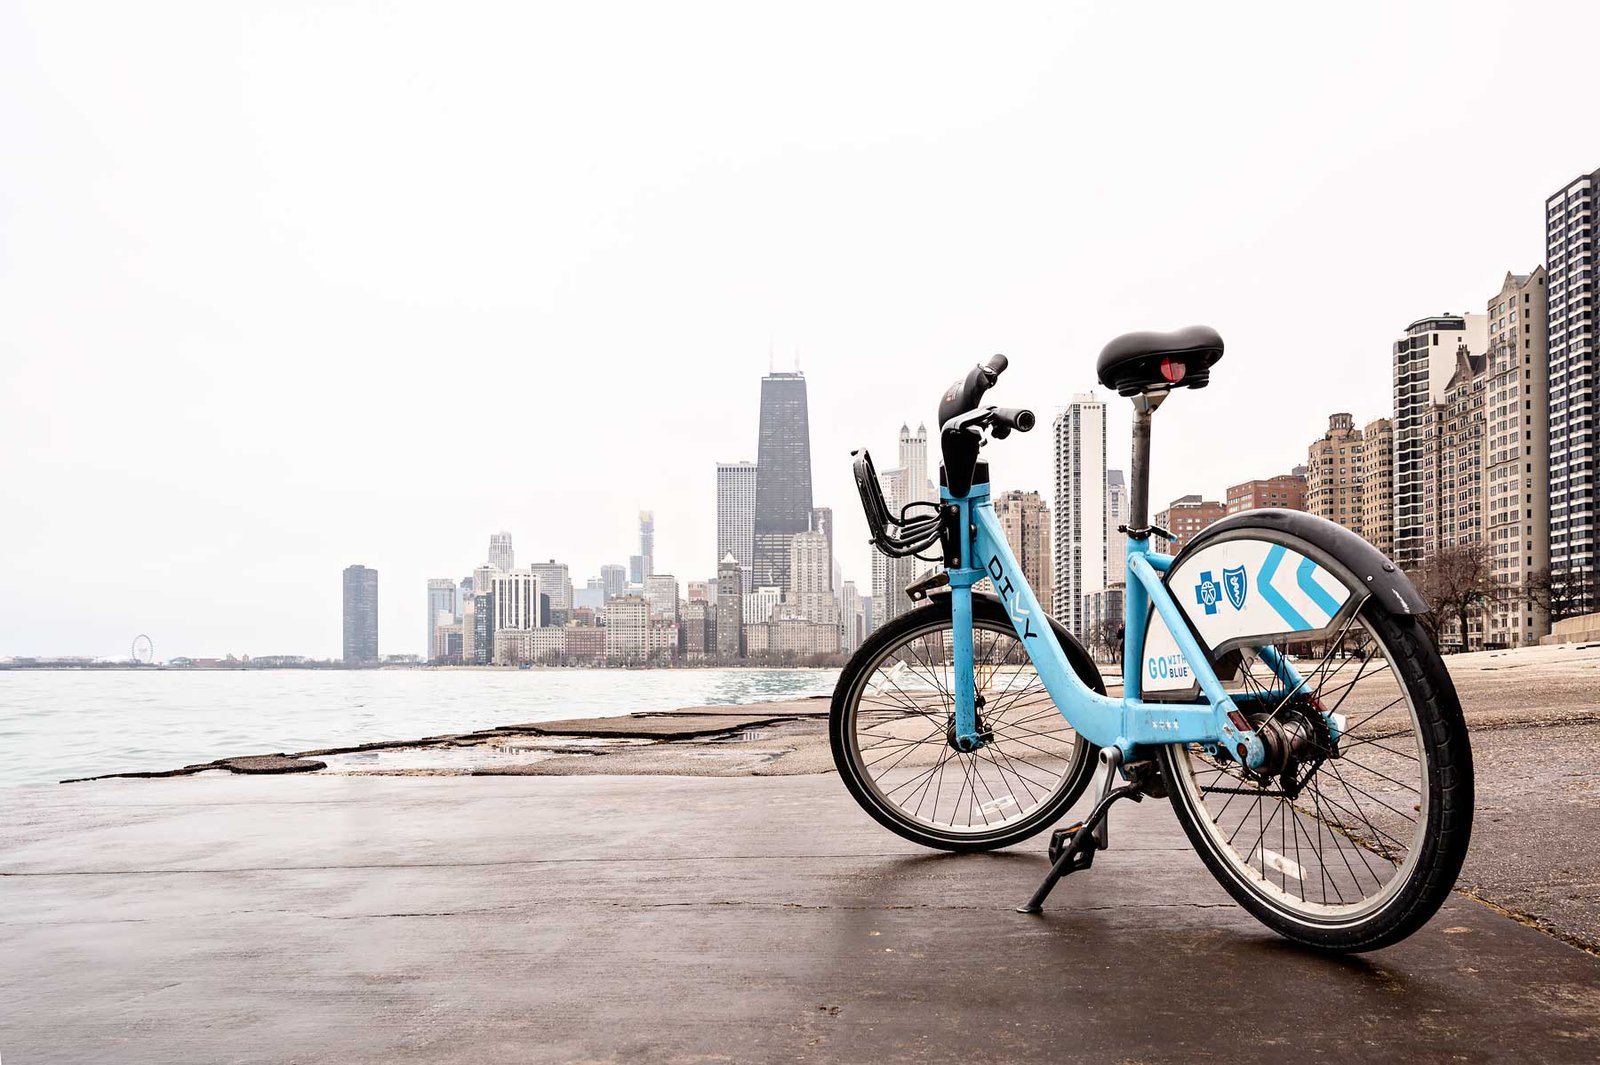 Public Bike Sharing Program Divvy in Chicago on the North Lake Shore Drive. The 15 Best Things to Do and See in Chicago